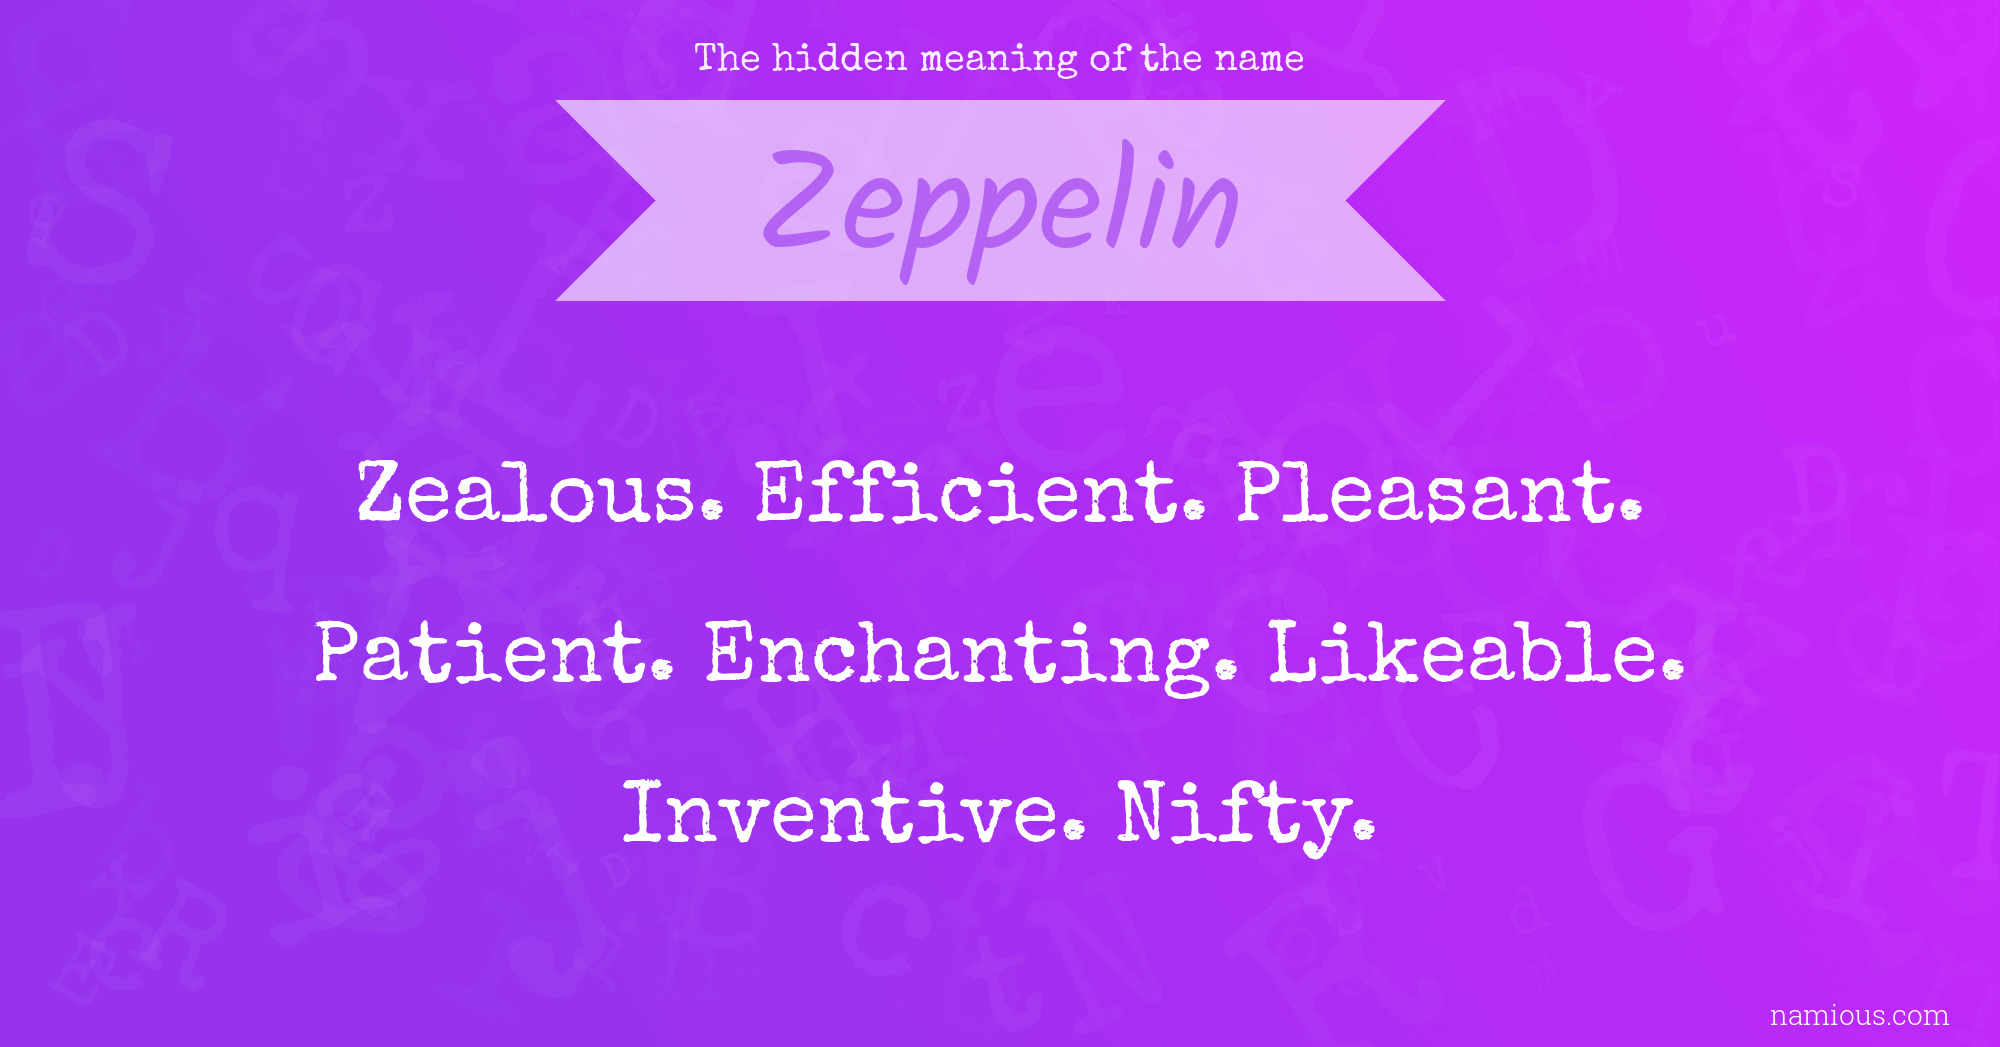 The hidden meaning of the name Zeppelin